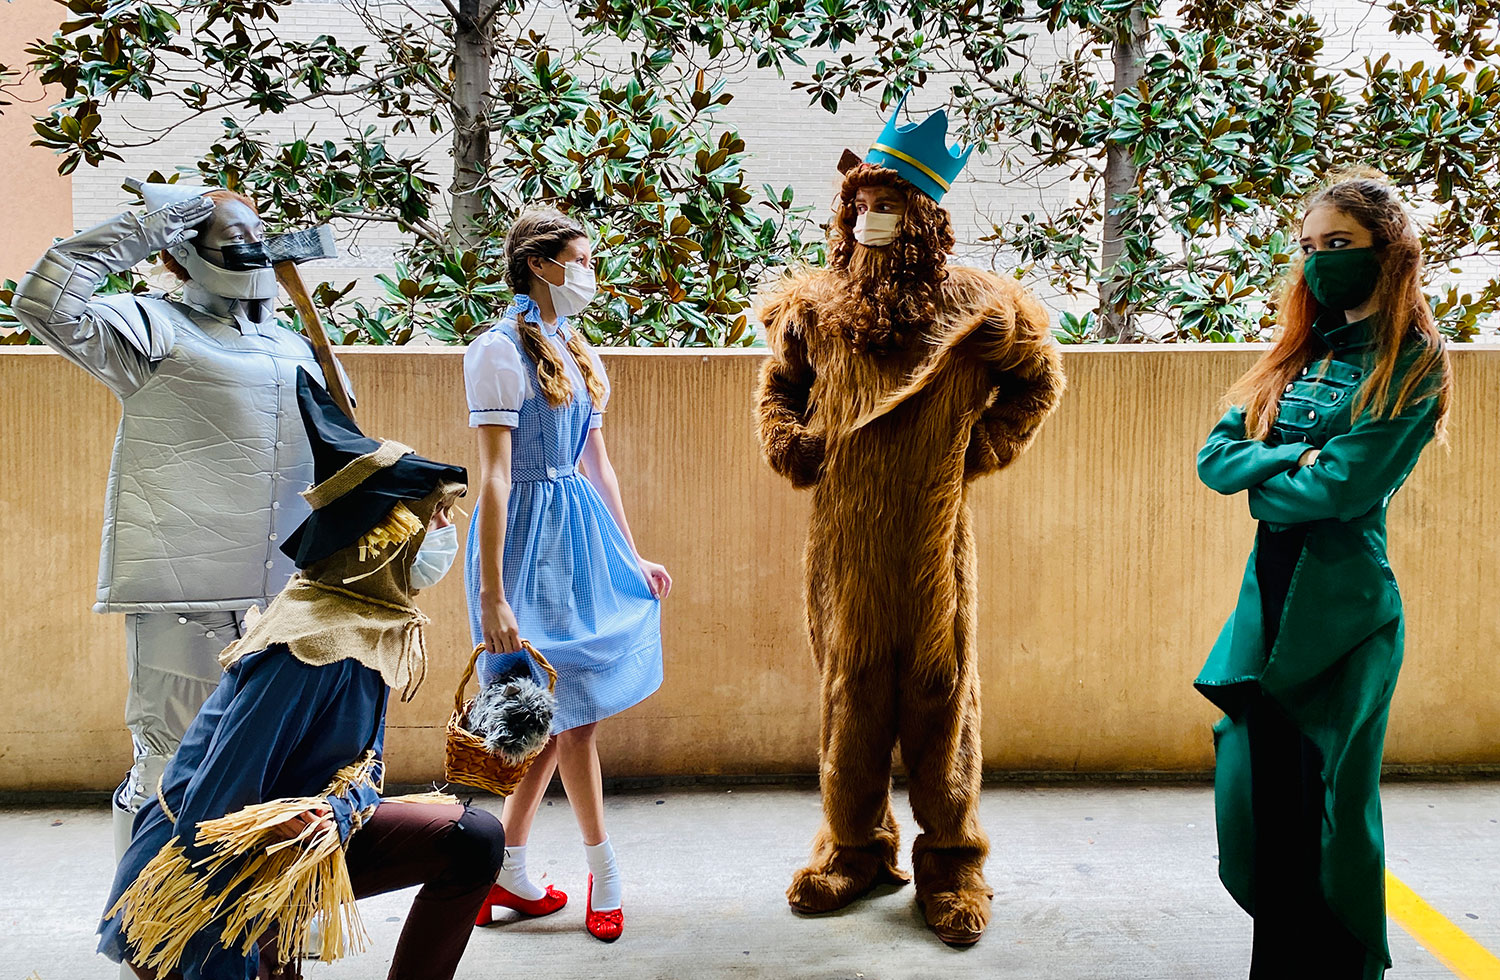 Cast members of the 30th anniversary production of "The Wizard of Oz" // courtesy NTPA